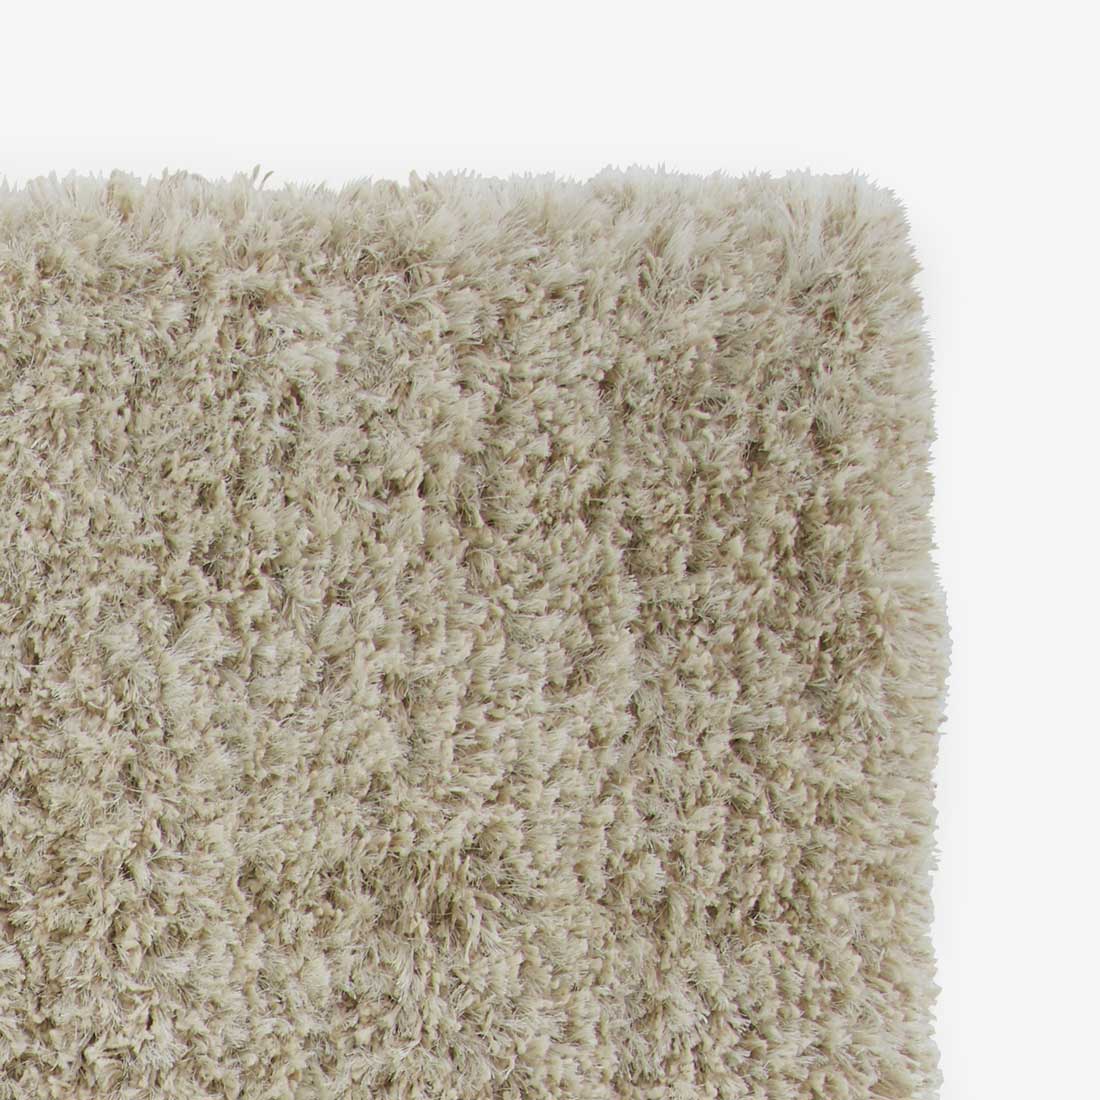 Image Rug sand in stock 2